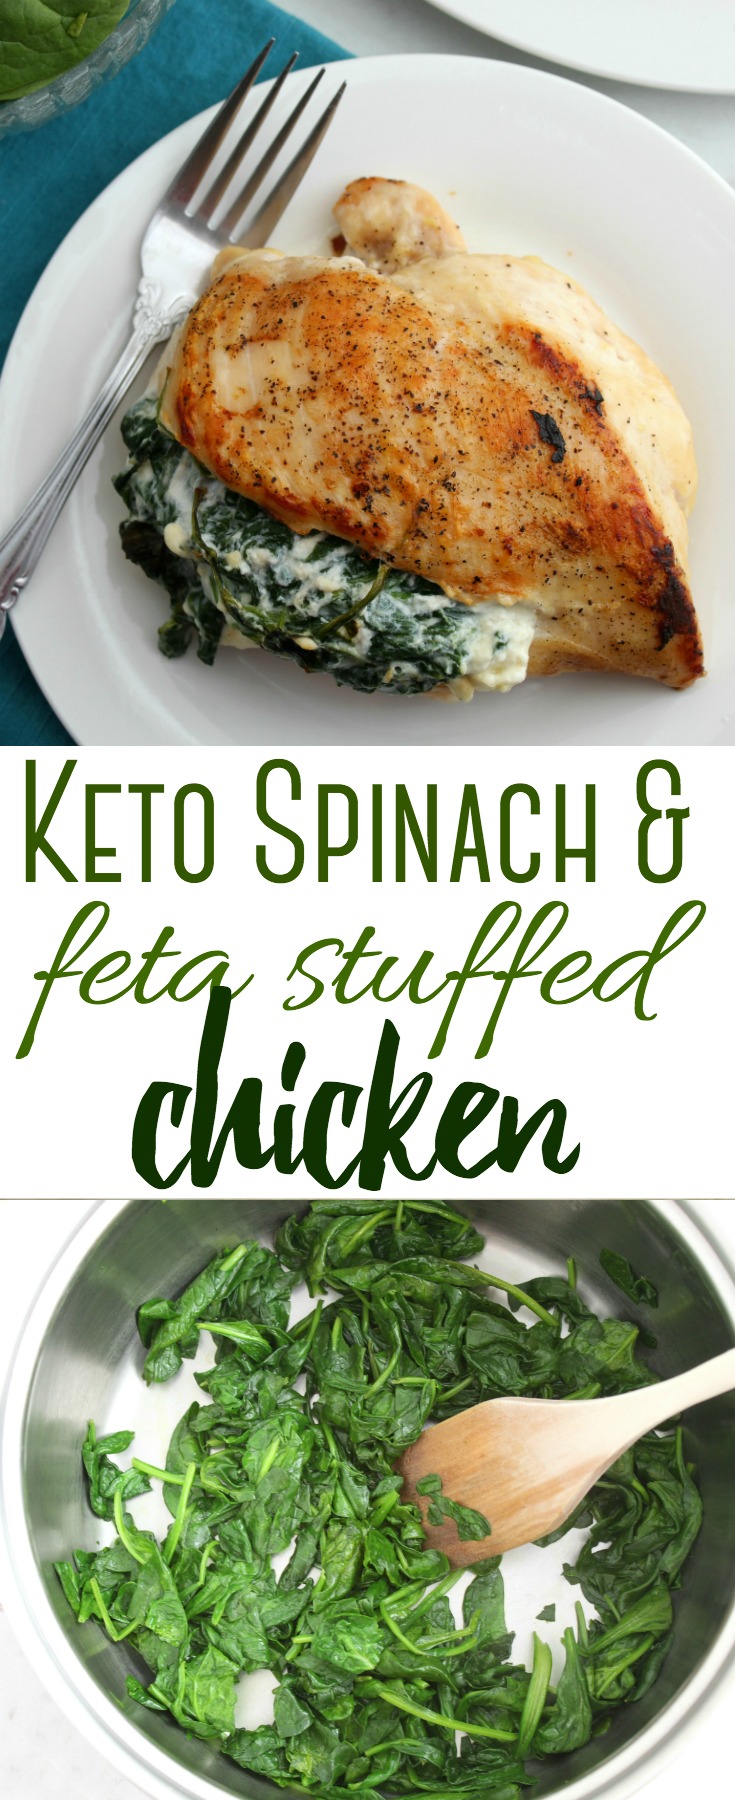 This low-carb Keto Spinach and Feta Stuffed Chicken is a keto-lovers dream! Not only is it easy to make, it's a crowd-pleaser that's also gluten-free!